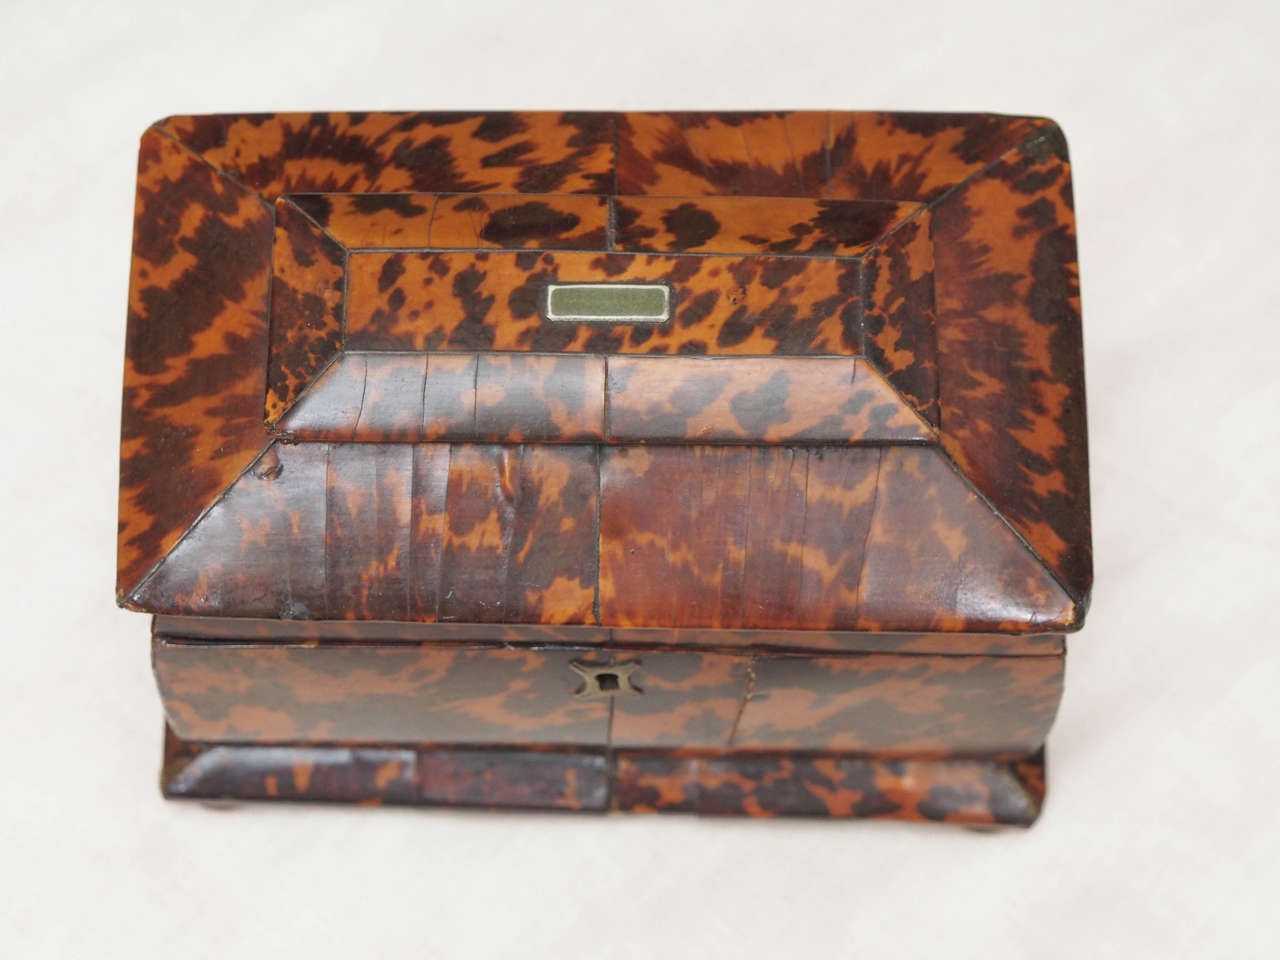 English Regency Tortoishell Tea Caddy In Good Condition For Sale In Natchez, MS